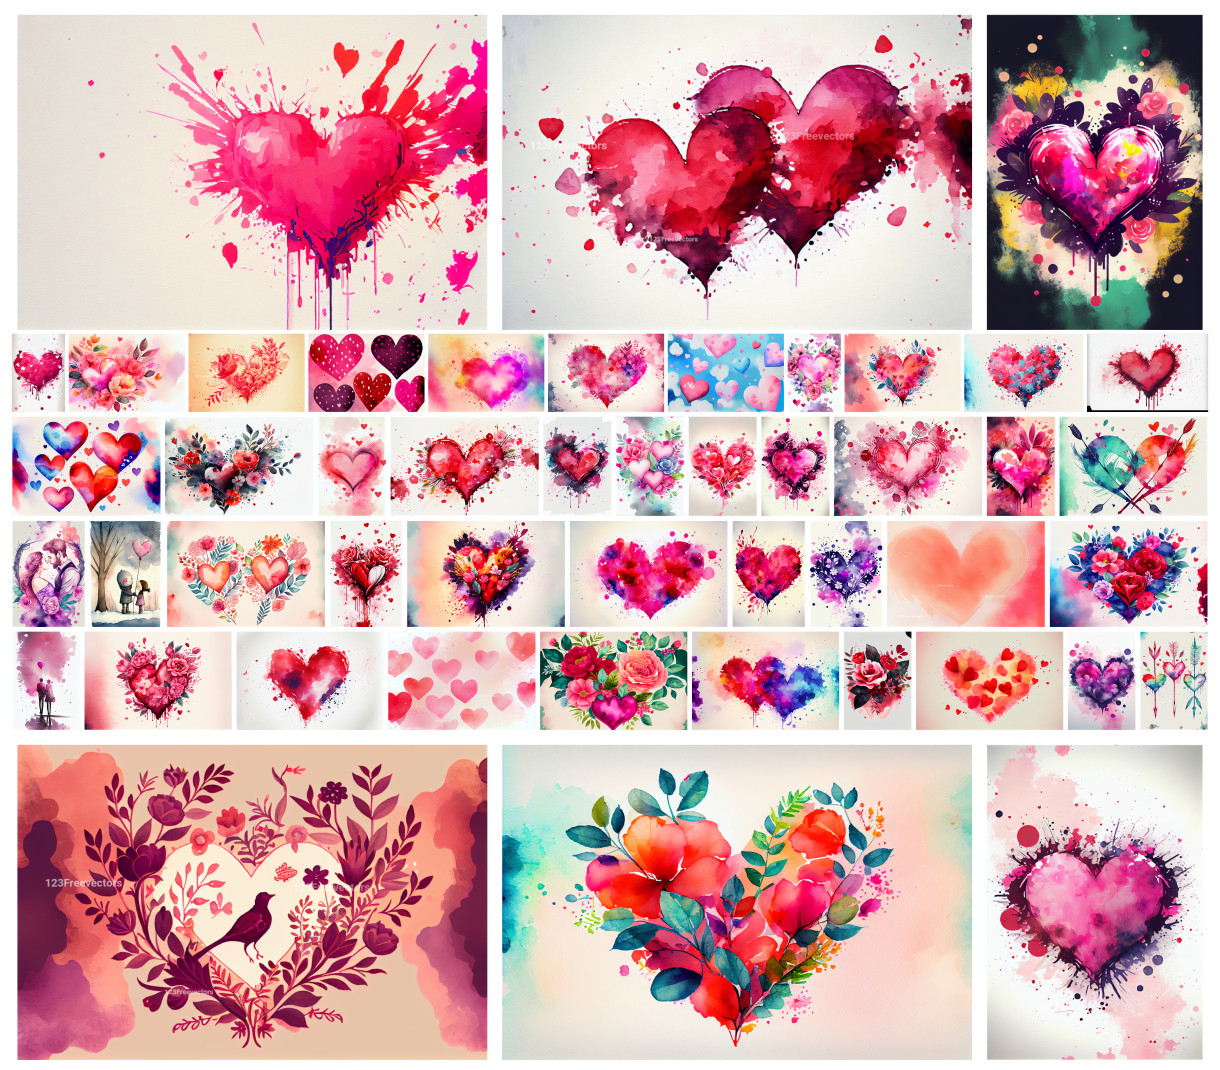 Express Love with Art: 48 Valentine’s Watercolor Heart Designs Available for Download